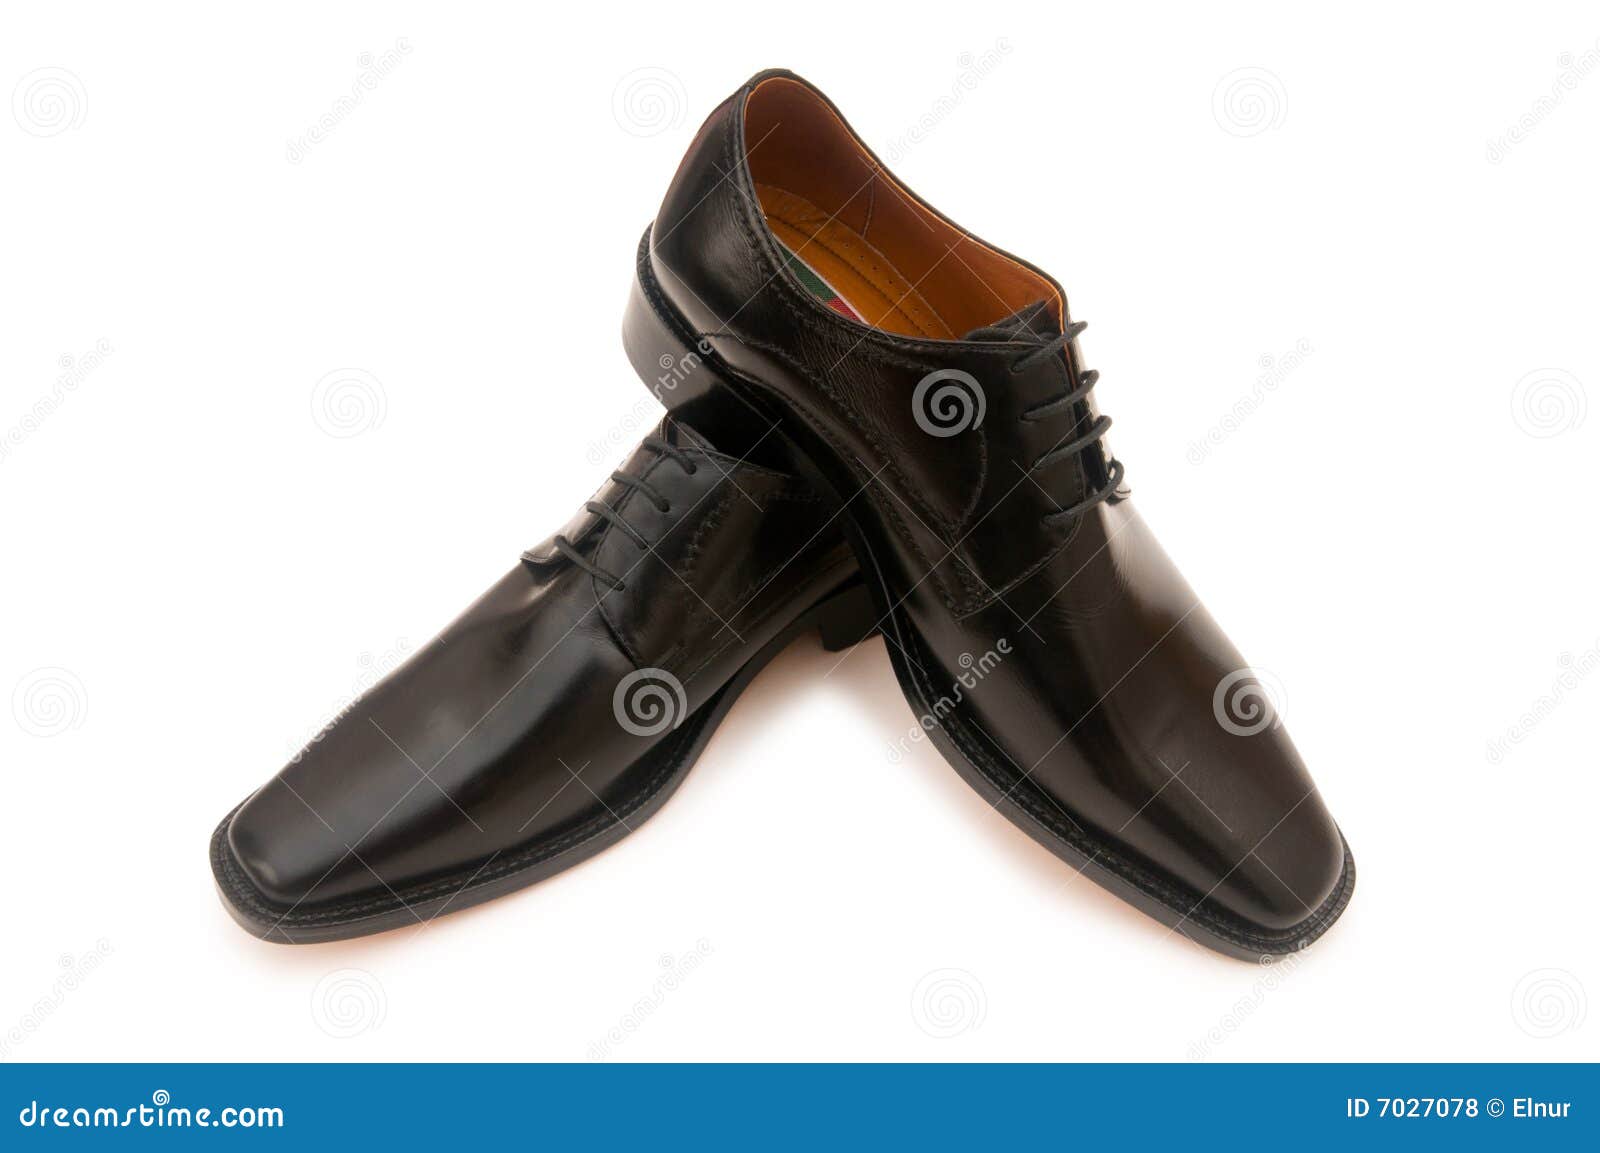 Black shoes isolated stock photo. Image of objects, object - 7027078